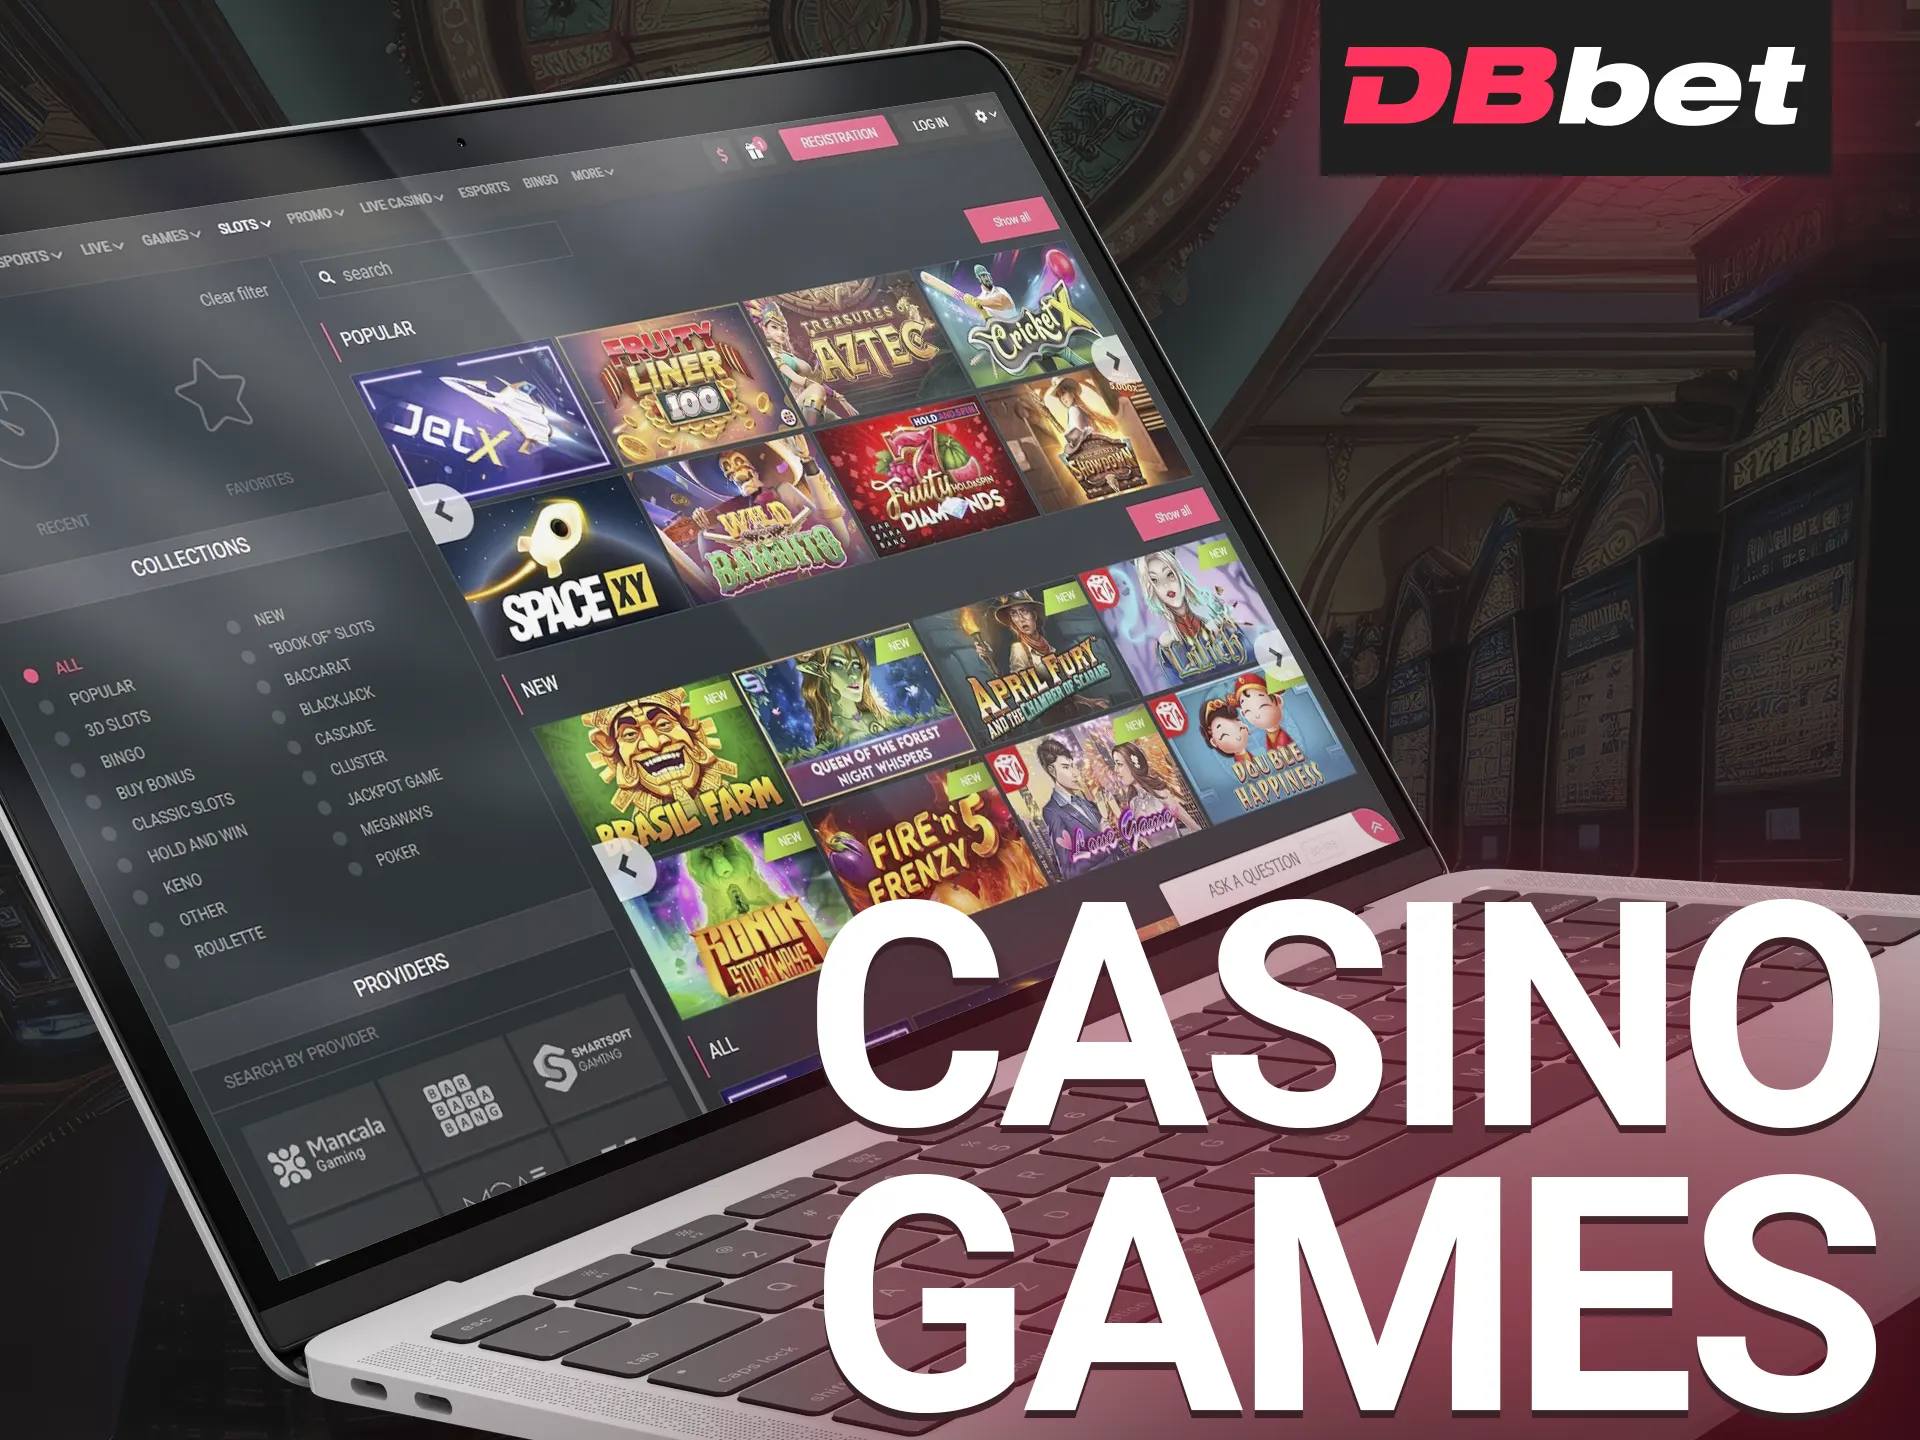 On DBBet in the casino section you can play a lot of exciting games.